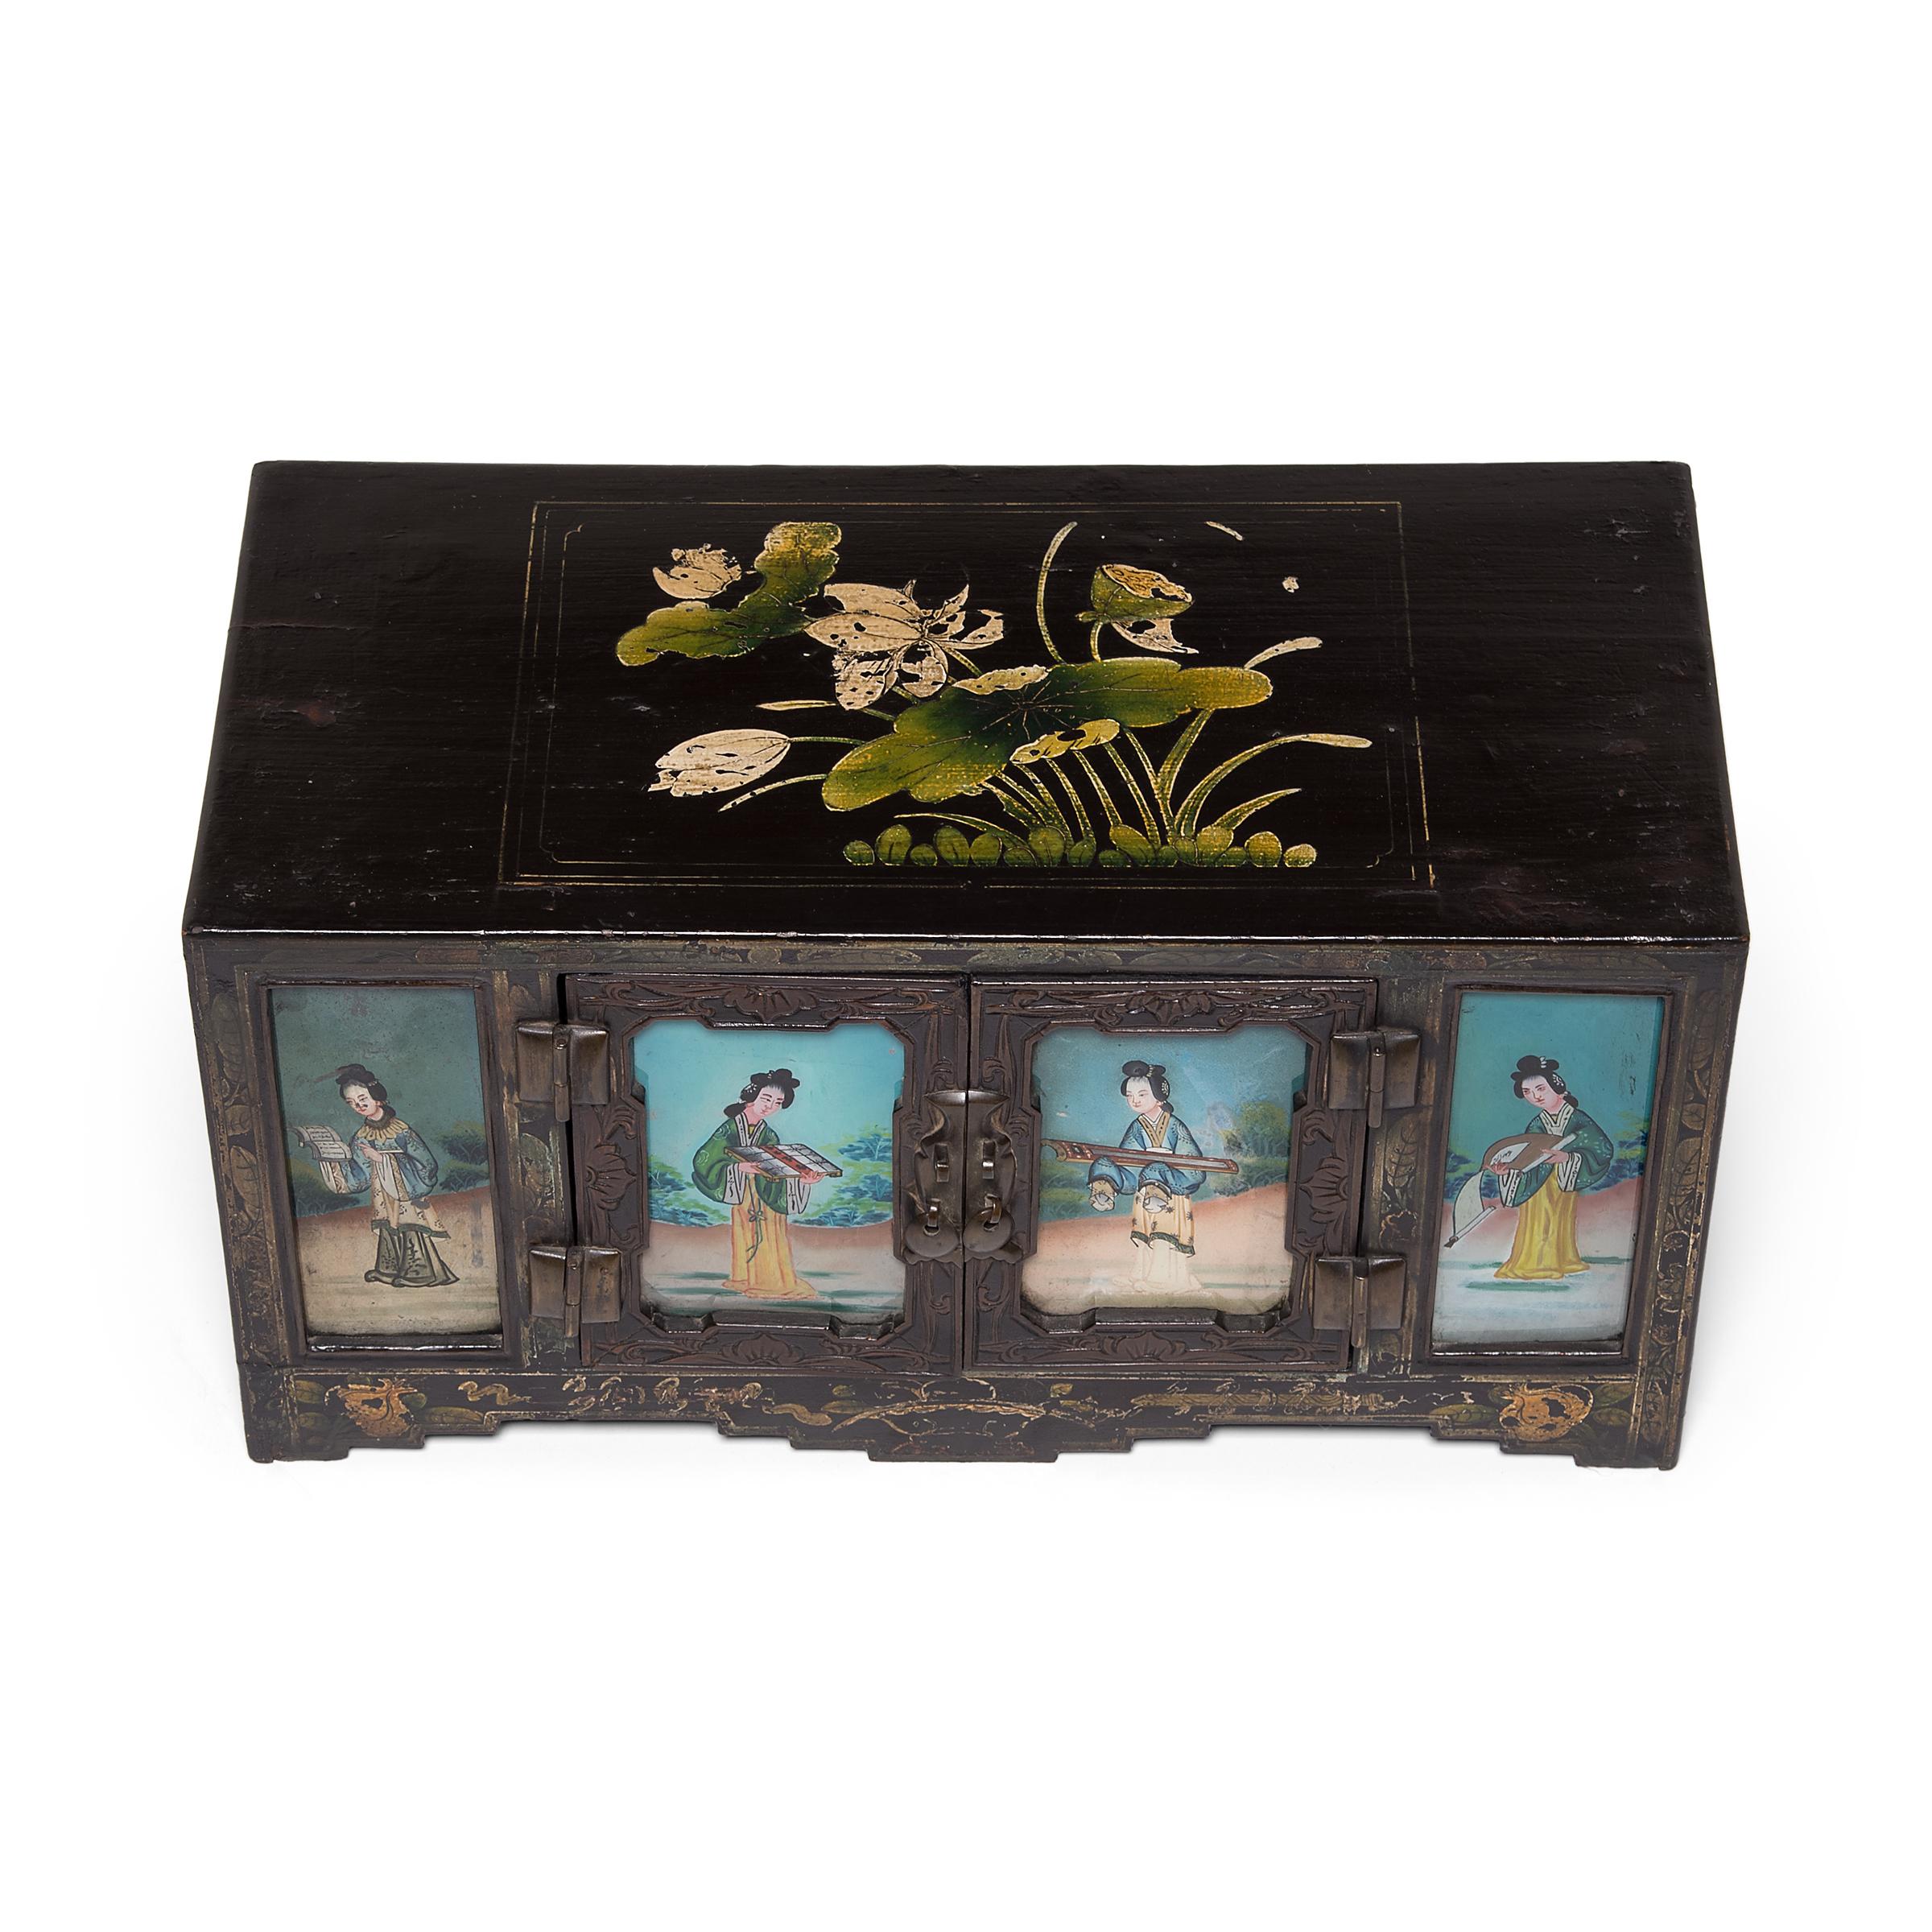 As much an artwork as a piece of furniture, this 19th century treasure chest from northern China is richly decorated with relief carvings and delicate gilt paintings. The doors bear inset reverse glass panels painted with beautiful women, the apron